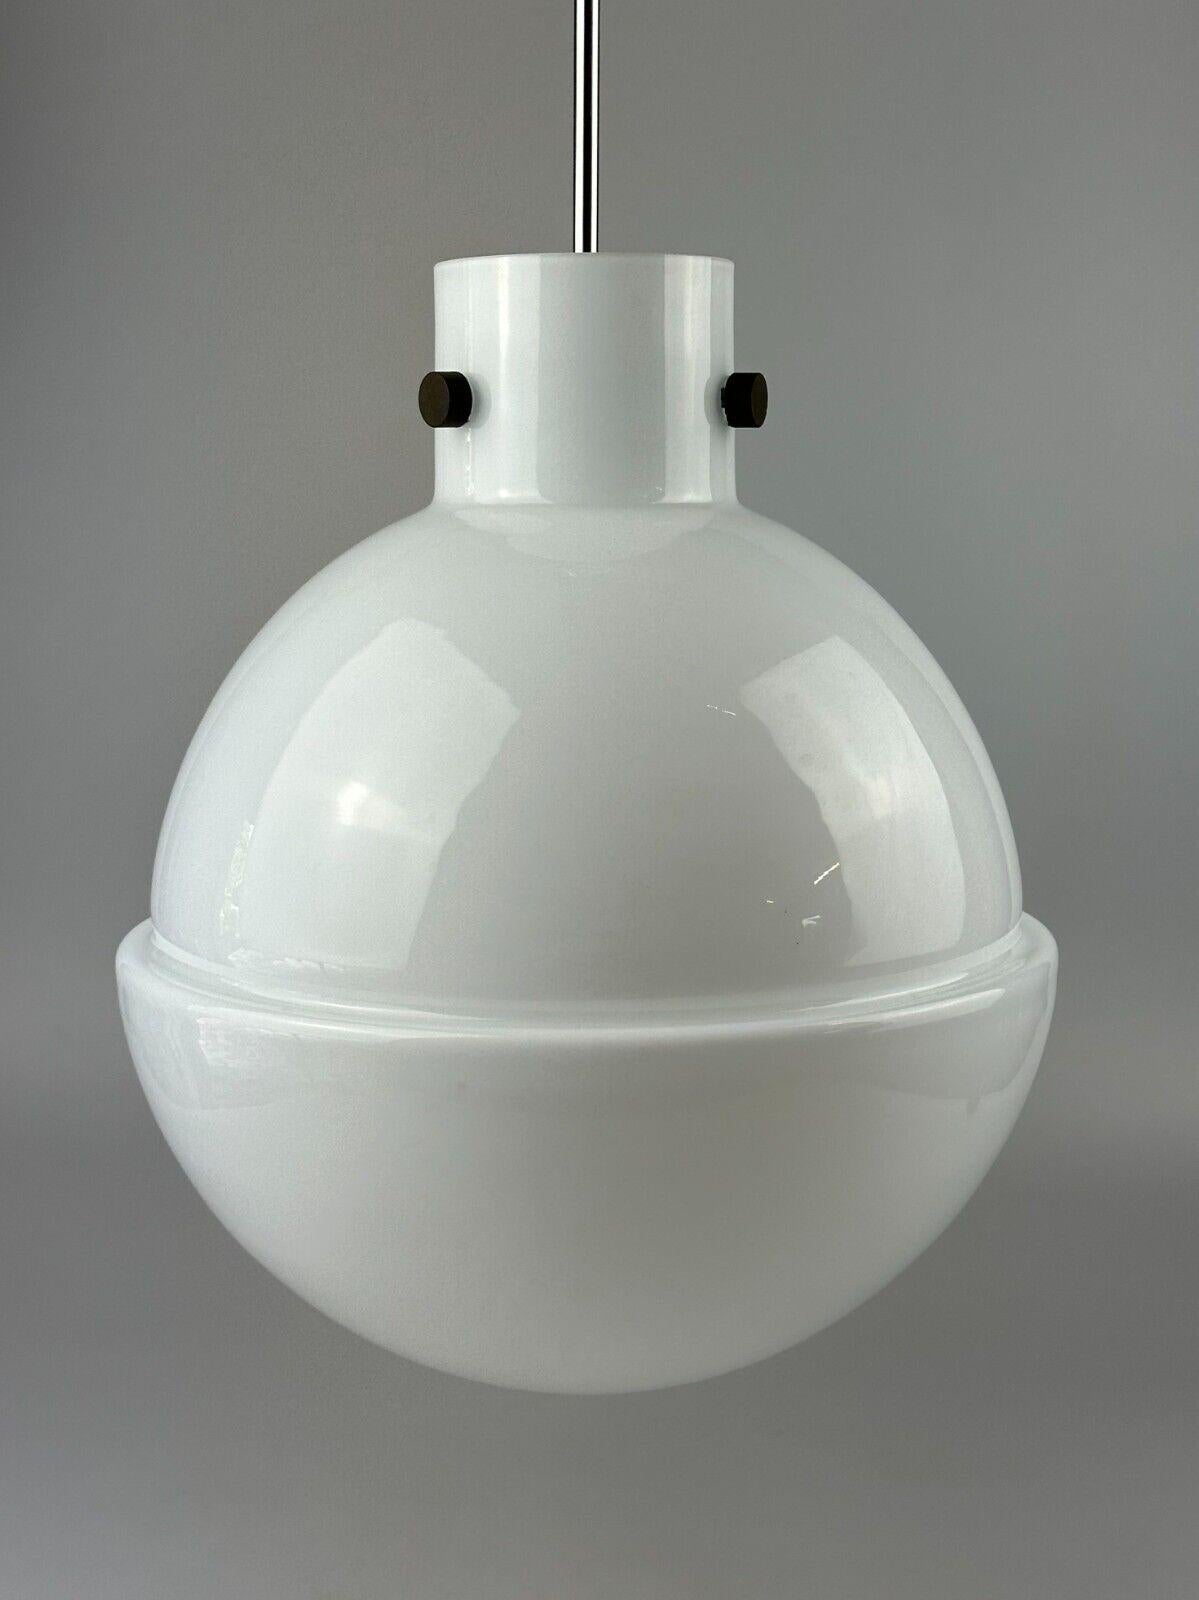 XL 60s 70s ceiling lamp ball lamp Glashütte Limburg Germany glass design In Good Condition For Sale In Neuenkirchen, NI